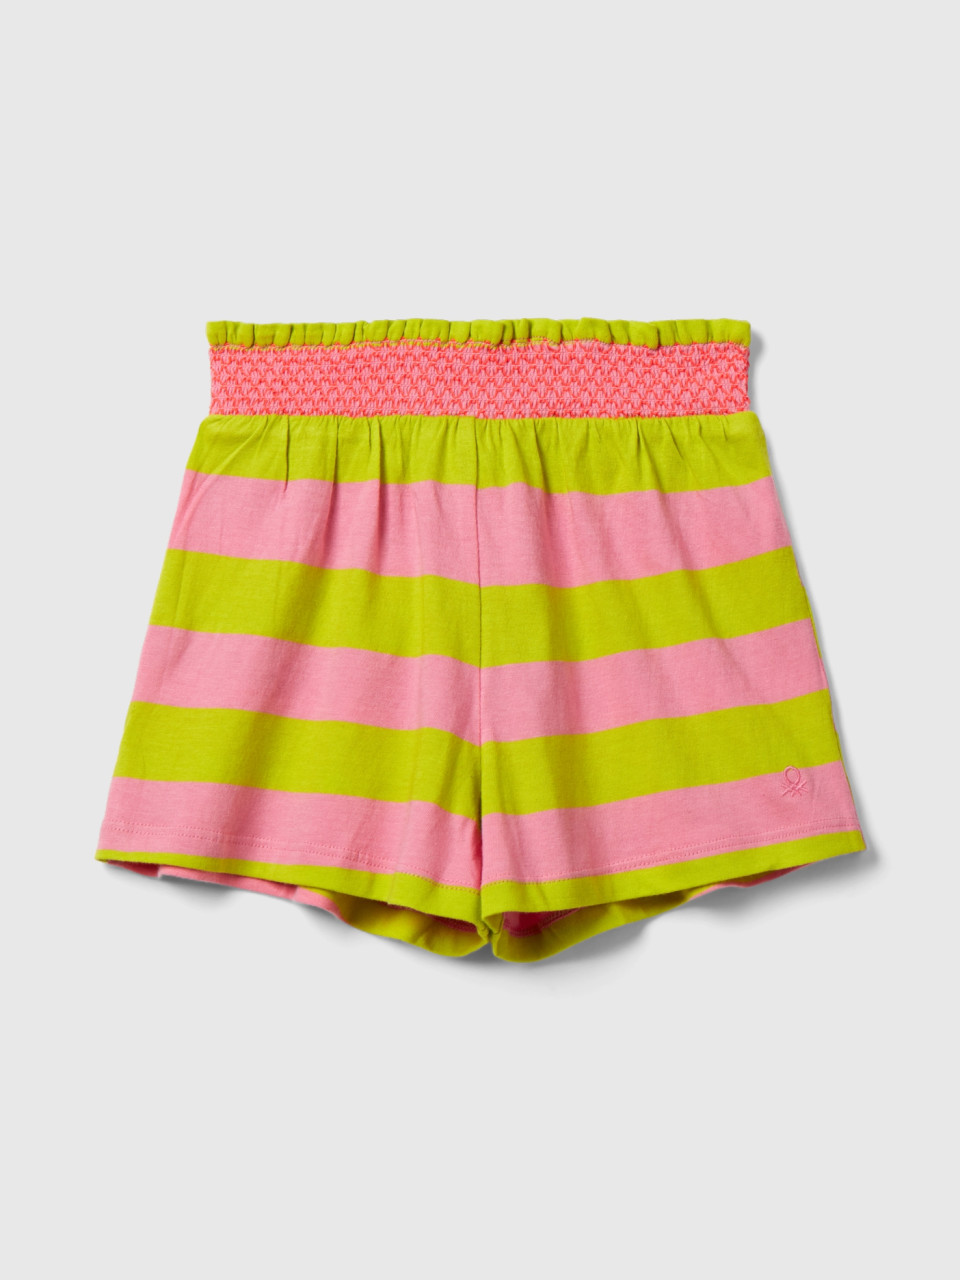 Benetton, Striped Shorts With Ruffles, Multi-color, Kids